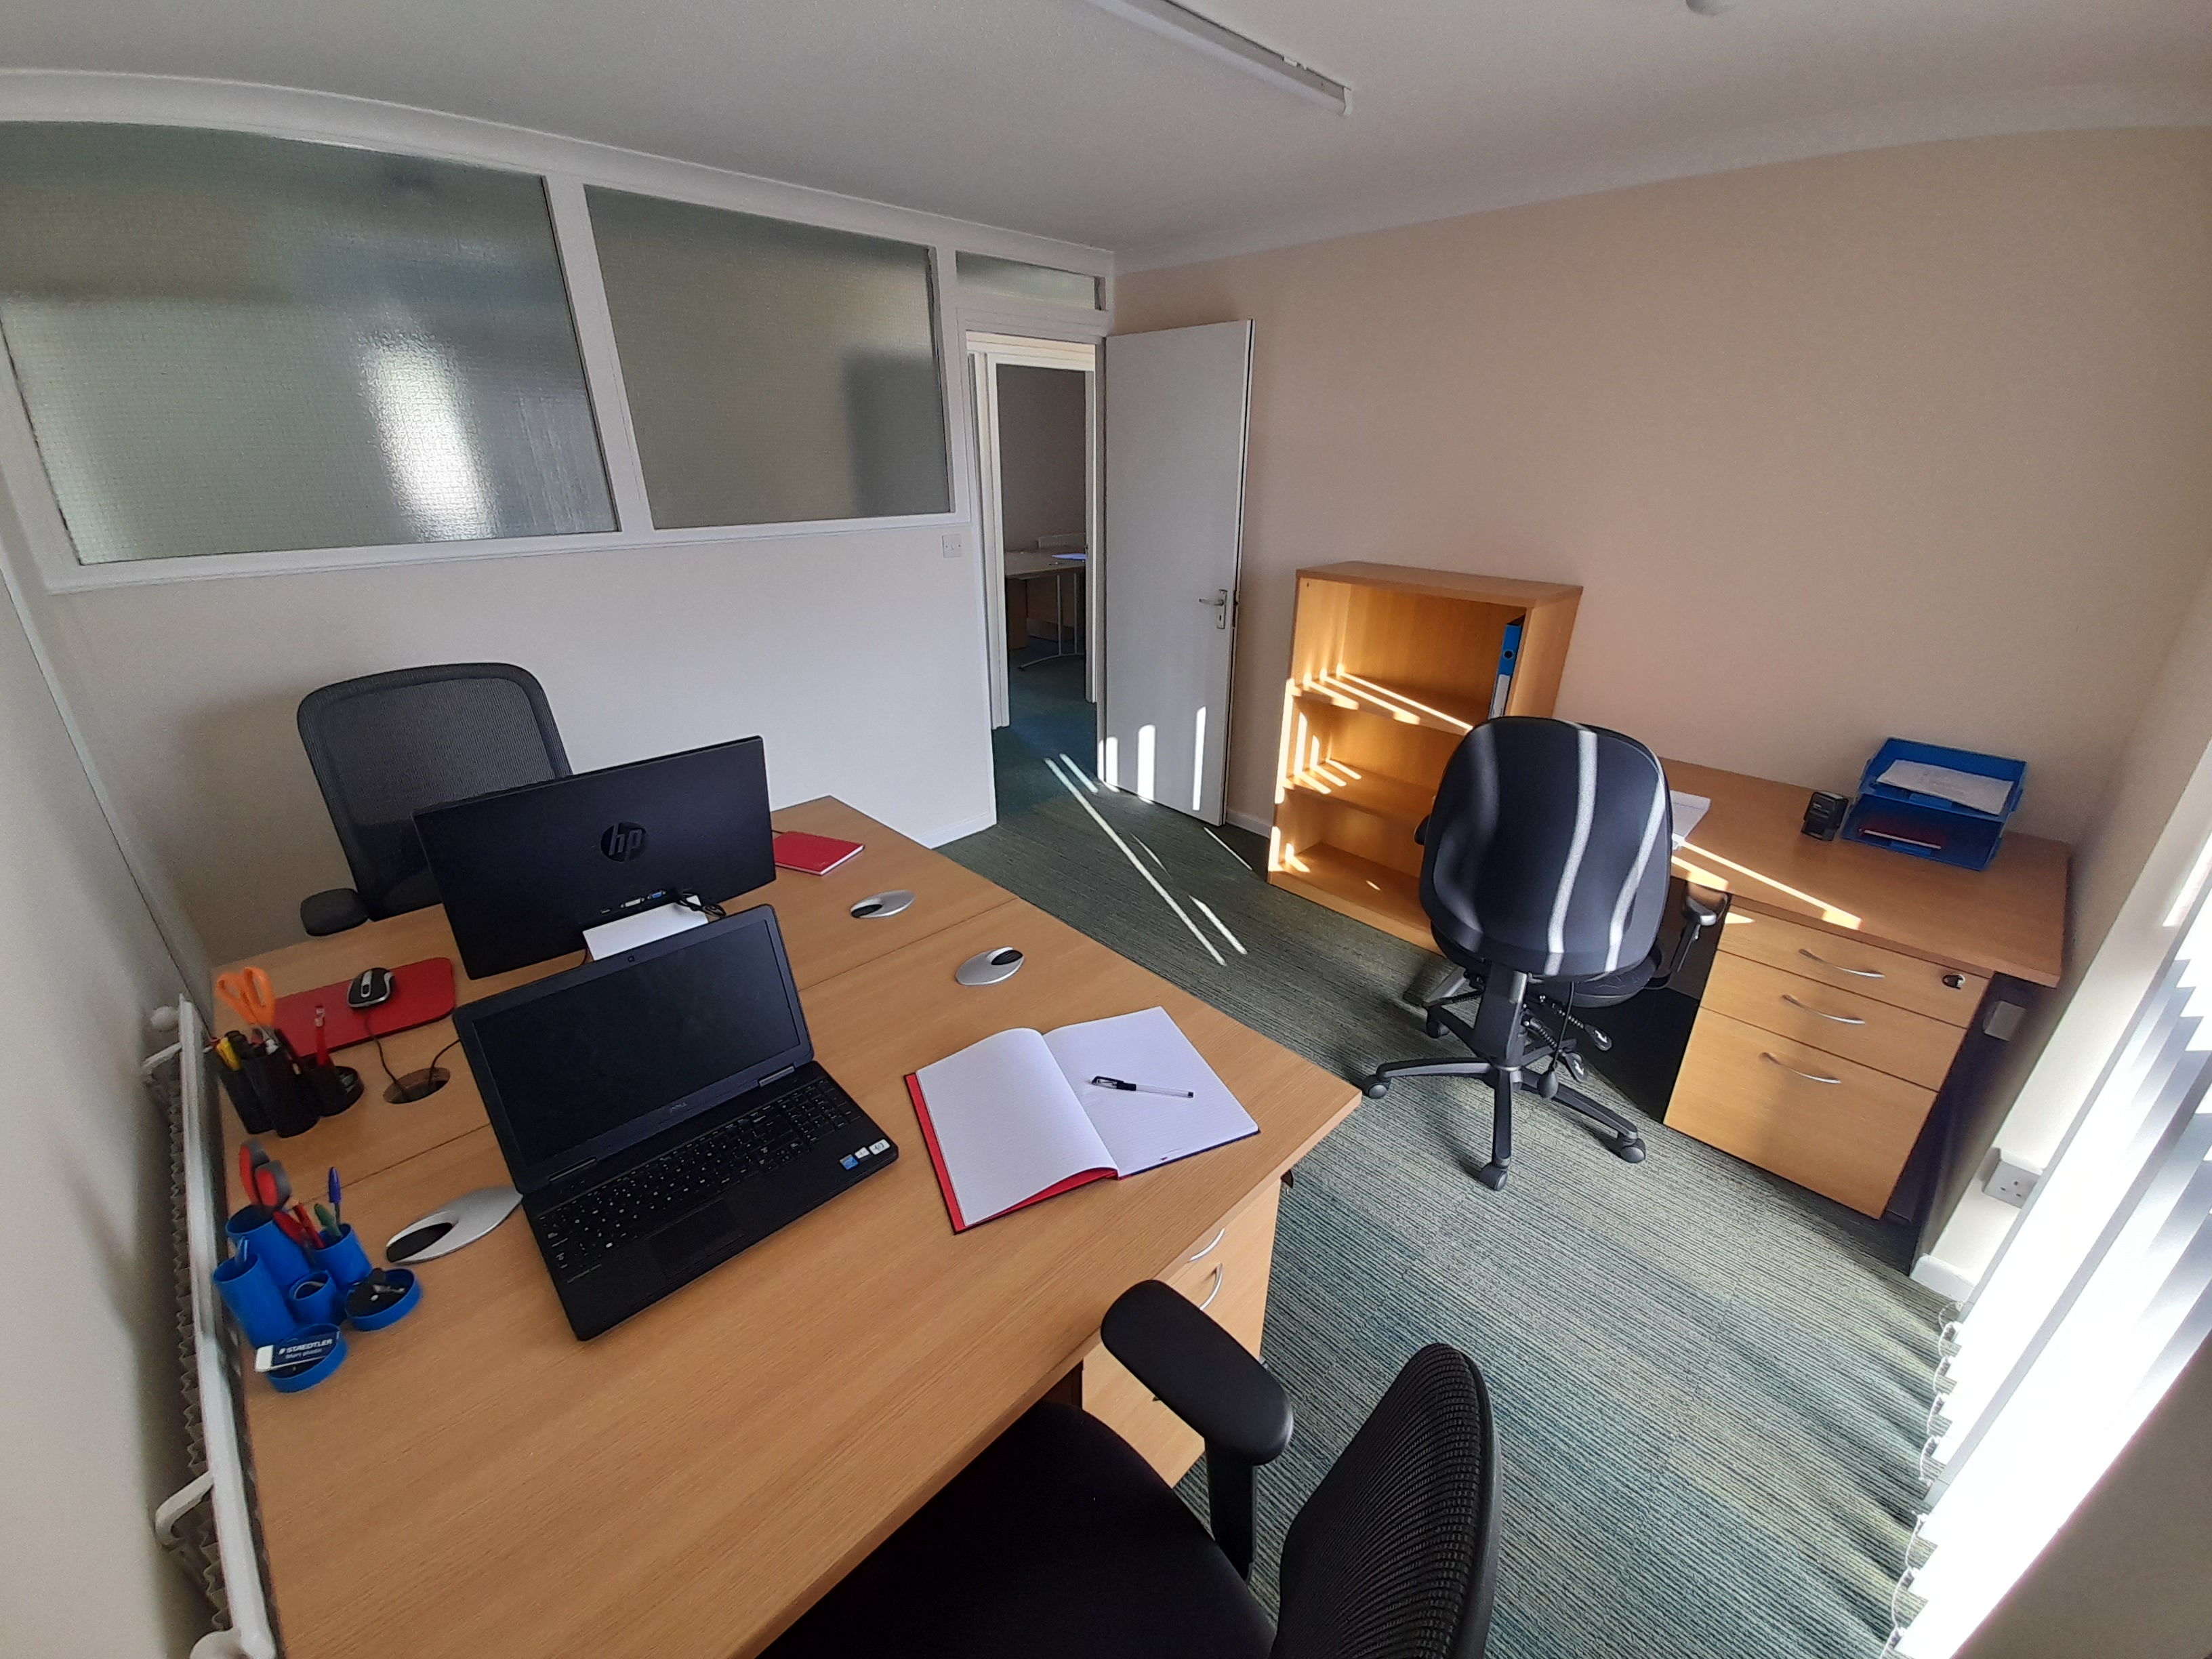 Huxley Hub, Serviced Offices, Easy in Easy out, Serviced Offices Plymouth, Serviced Offices Plympton, Easy in Easy out Offices Plymouth, Easy in Easy out Offices Plympton, Huxley Hub Serviced Offices, Huxley Hub 3 Person Office, 3 Person Office Huxley Hub